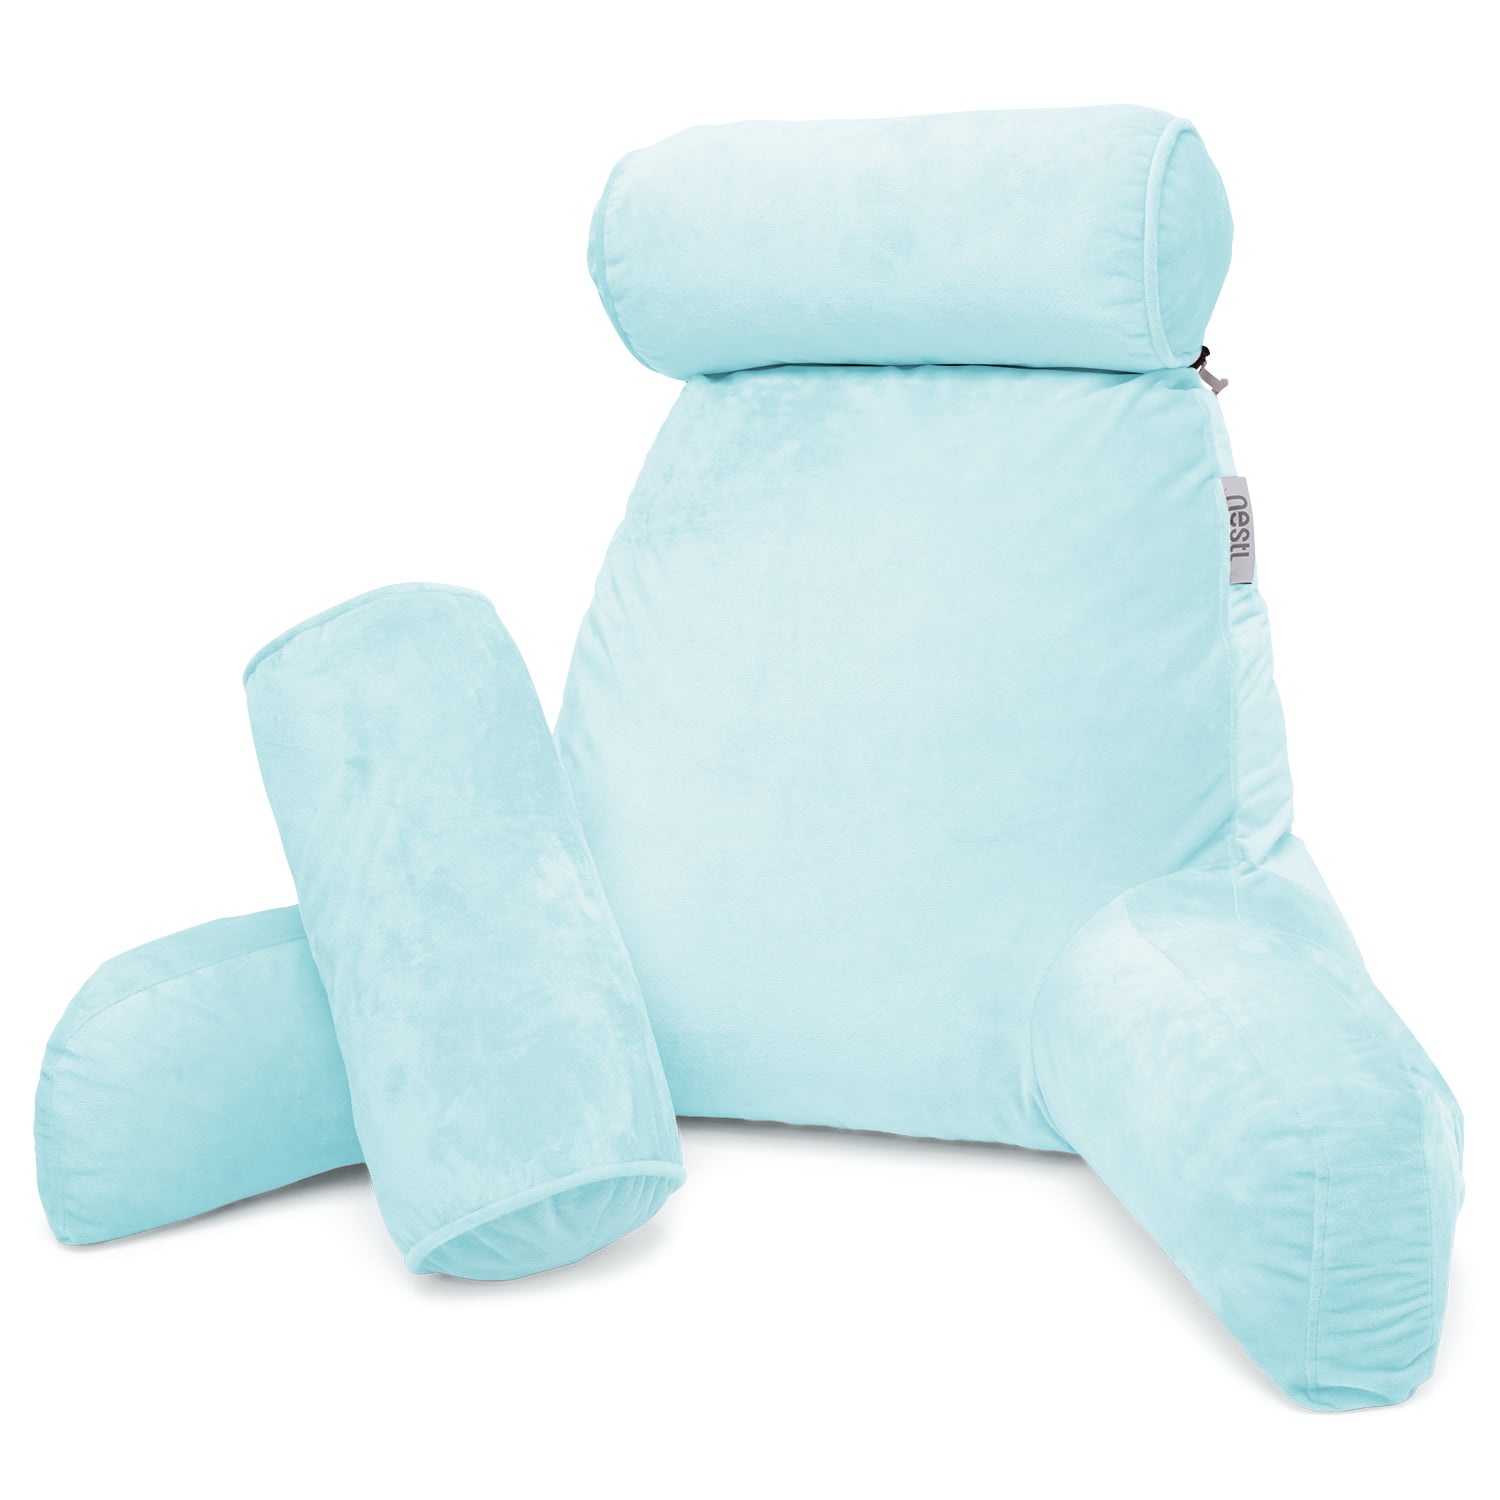 walmart bed pillow with arms